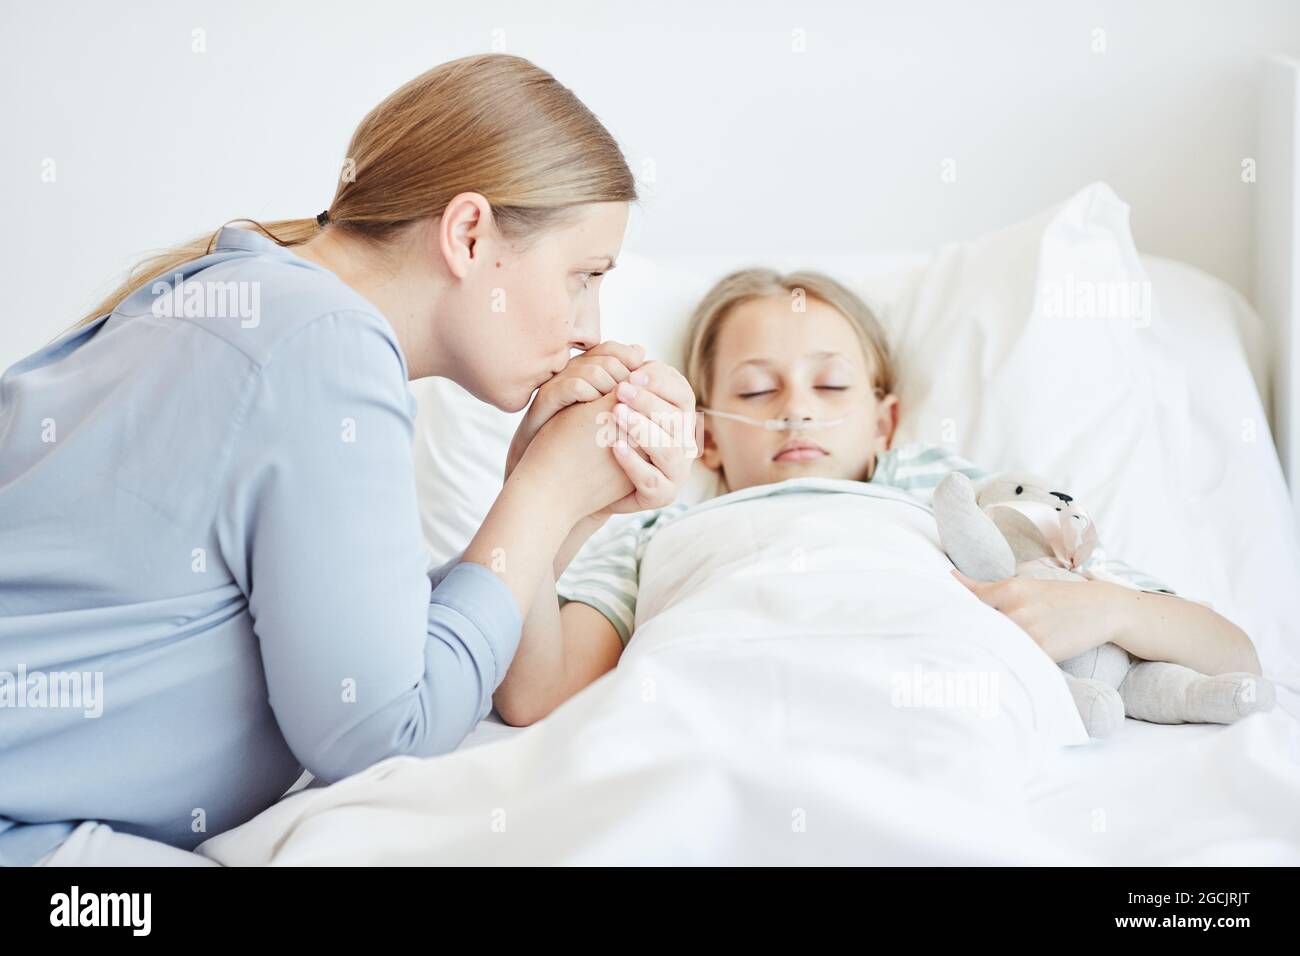 Side view portrait of caring mother holding hand of child in hospital room with oxygen support Stock Photo